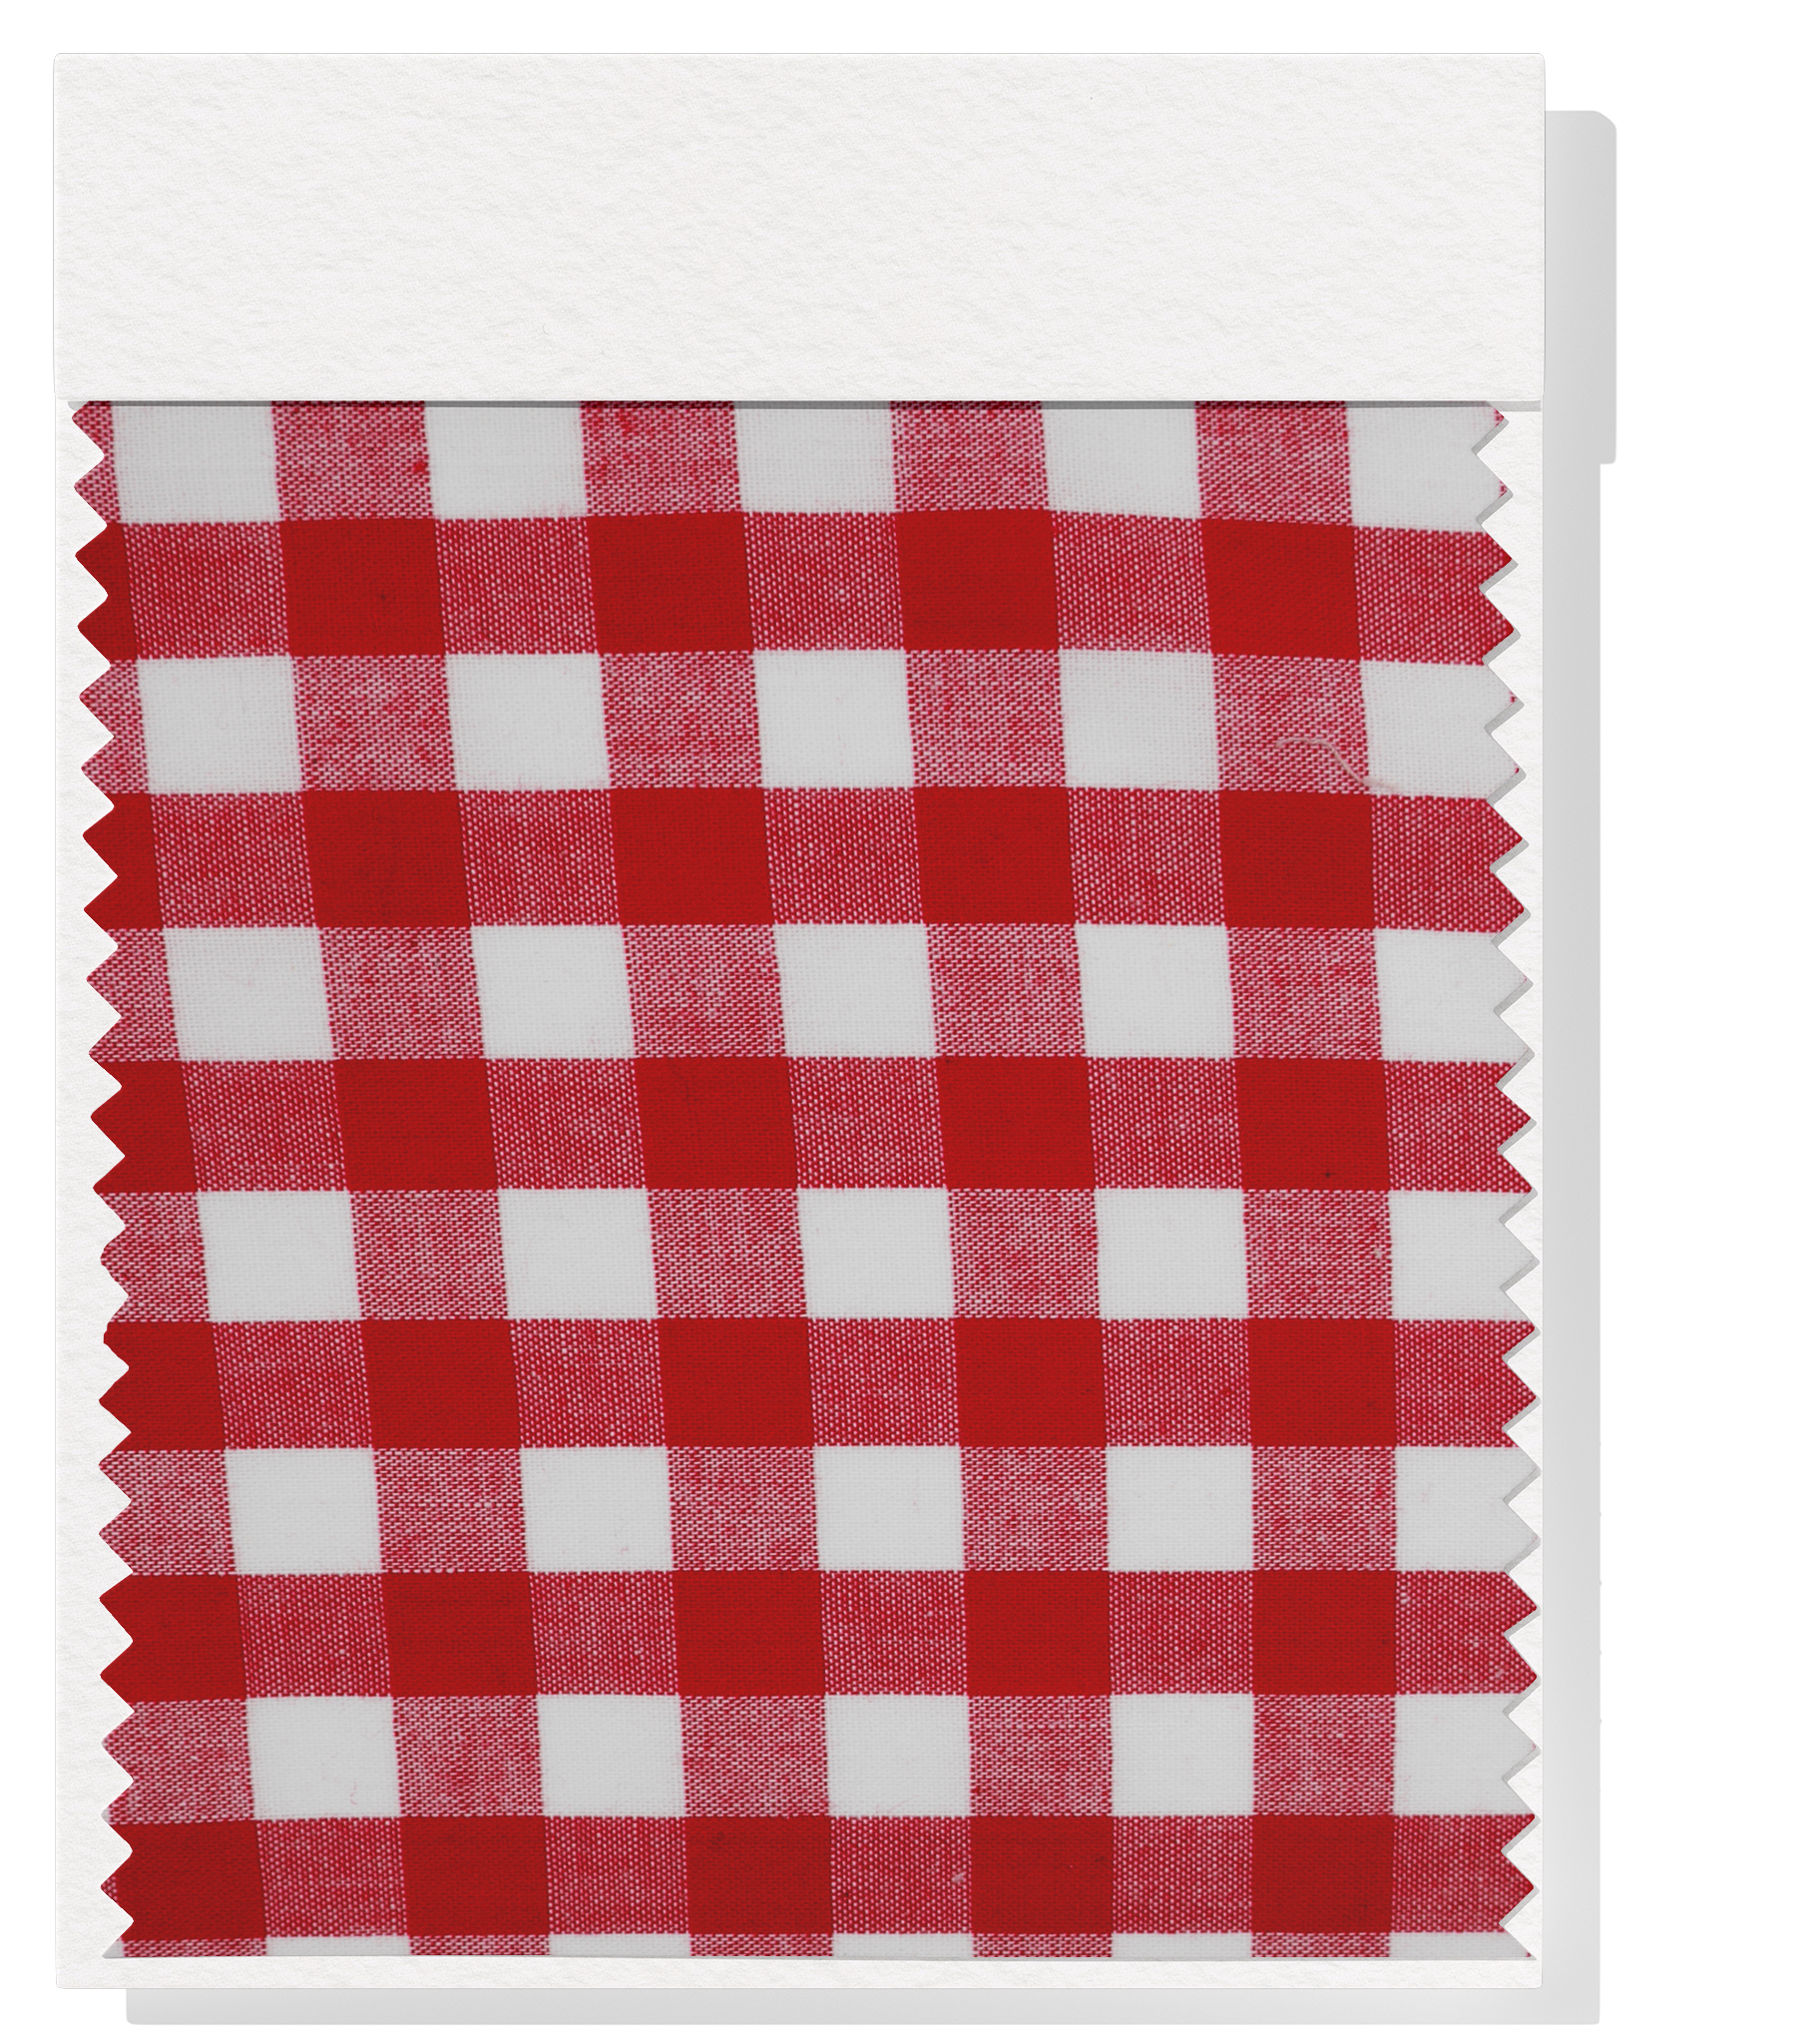 Cotton Gingham Print $14.00p/m -  Red & White (Large)